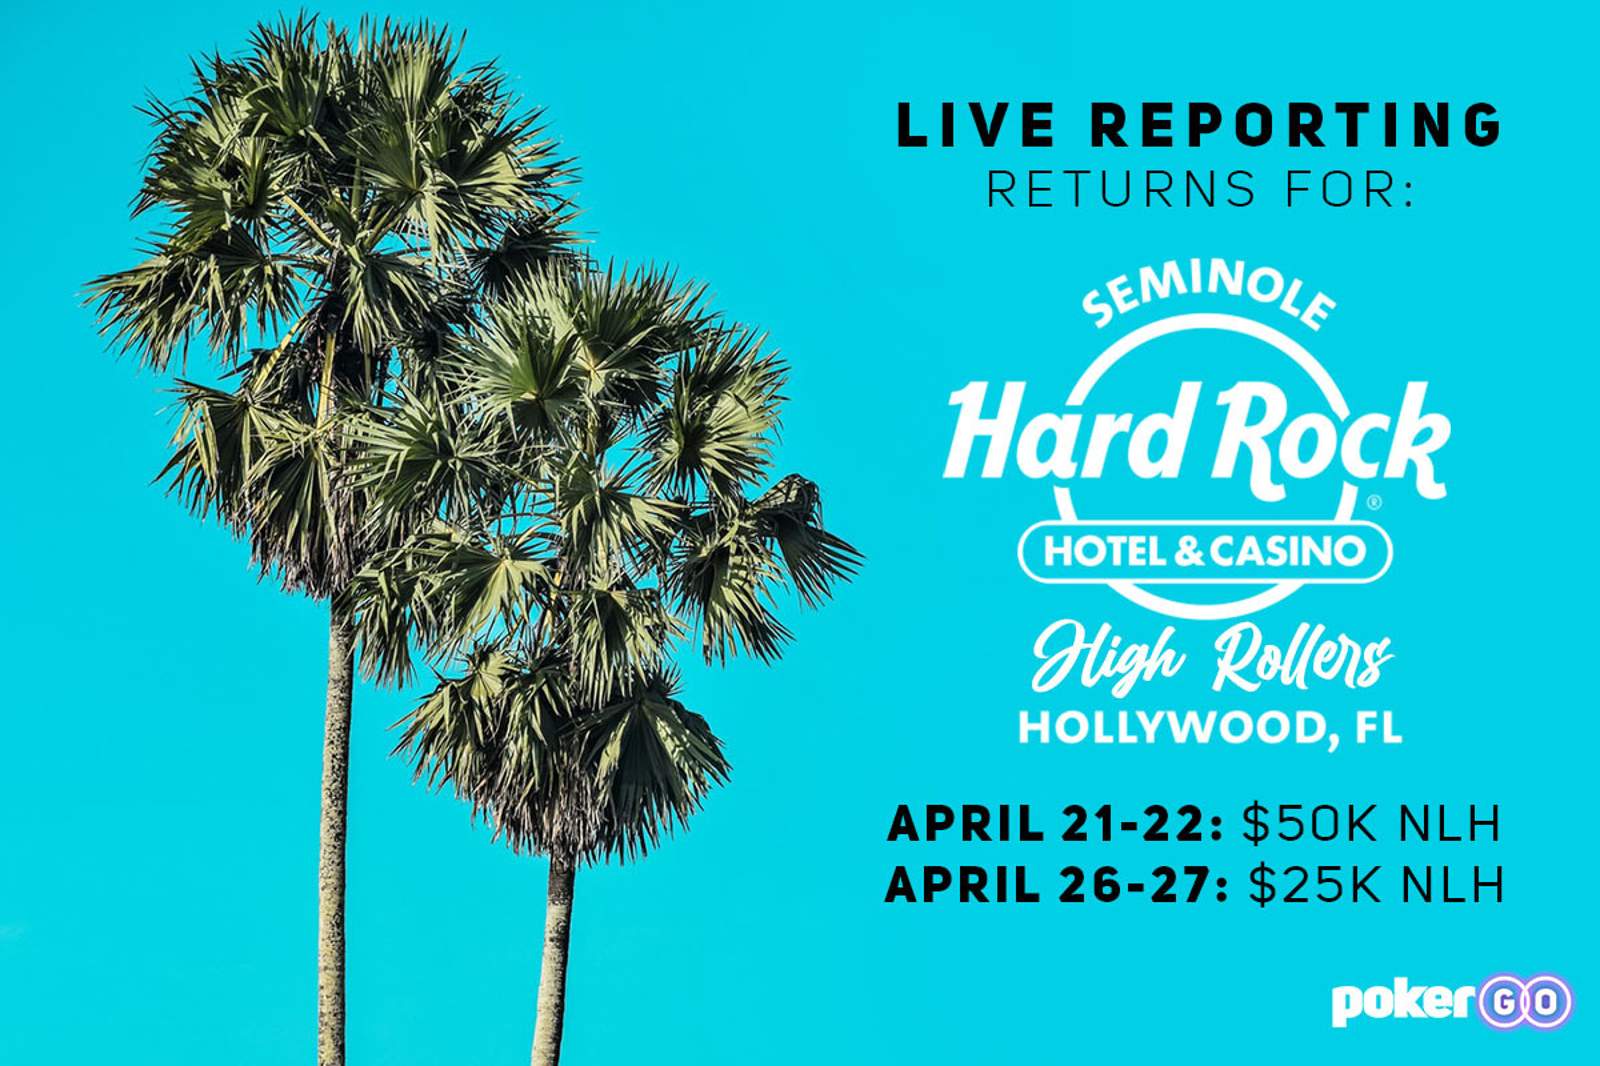 Live Reporting Returns for $50K and $25K Seminole High Rollers